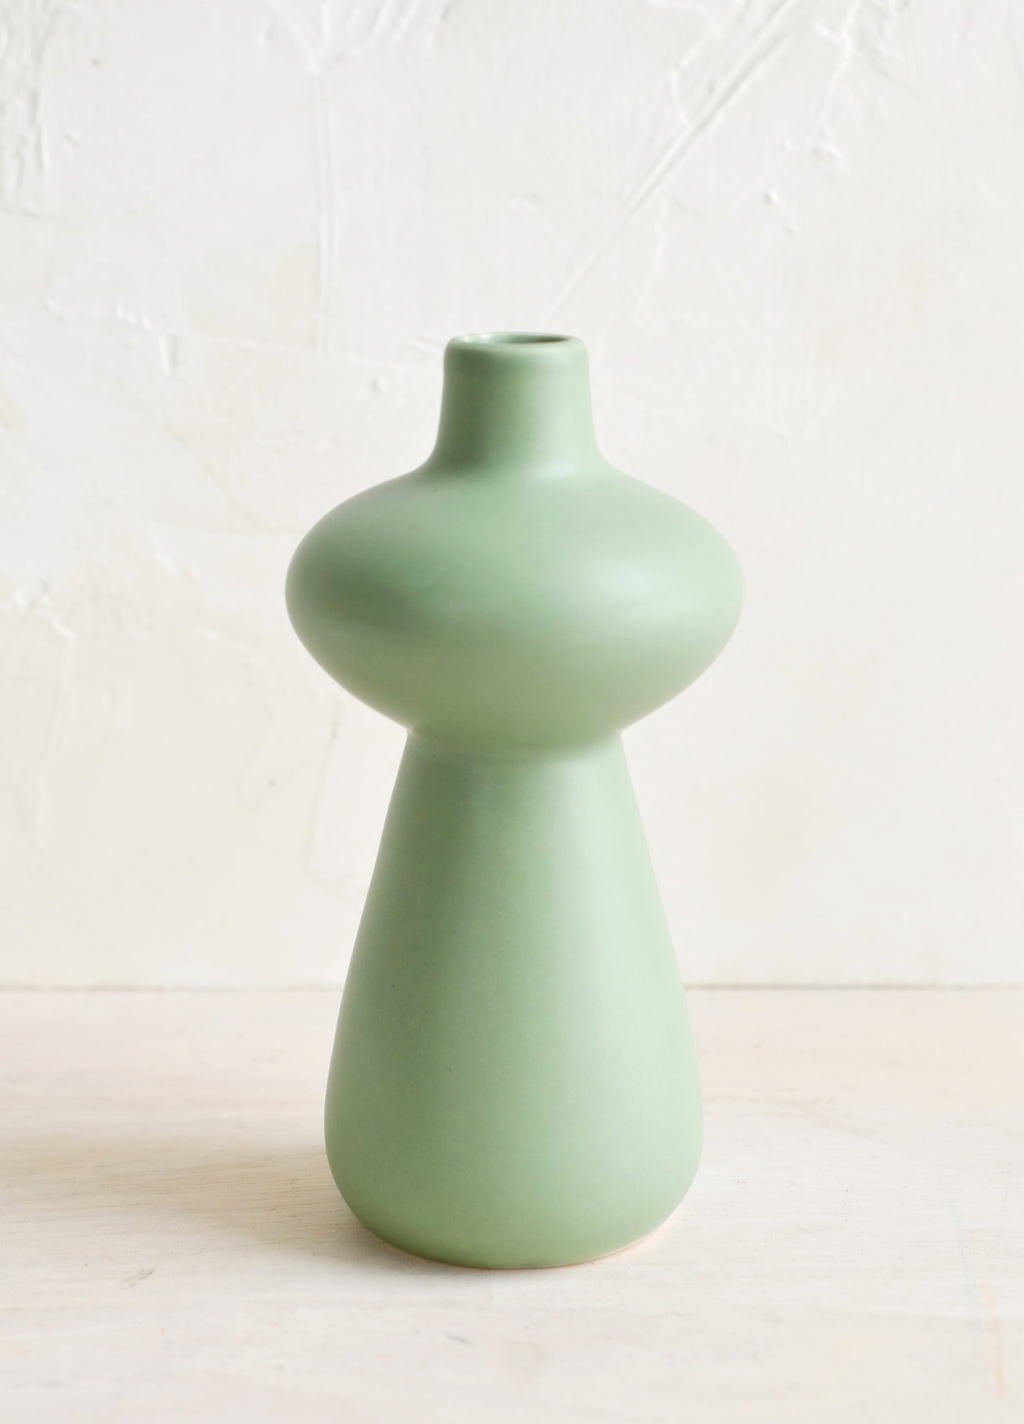 Hourglass: A mint green ceramic bud vase in curvy hourglass silhouette.